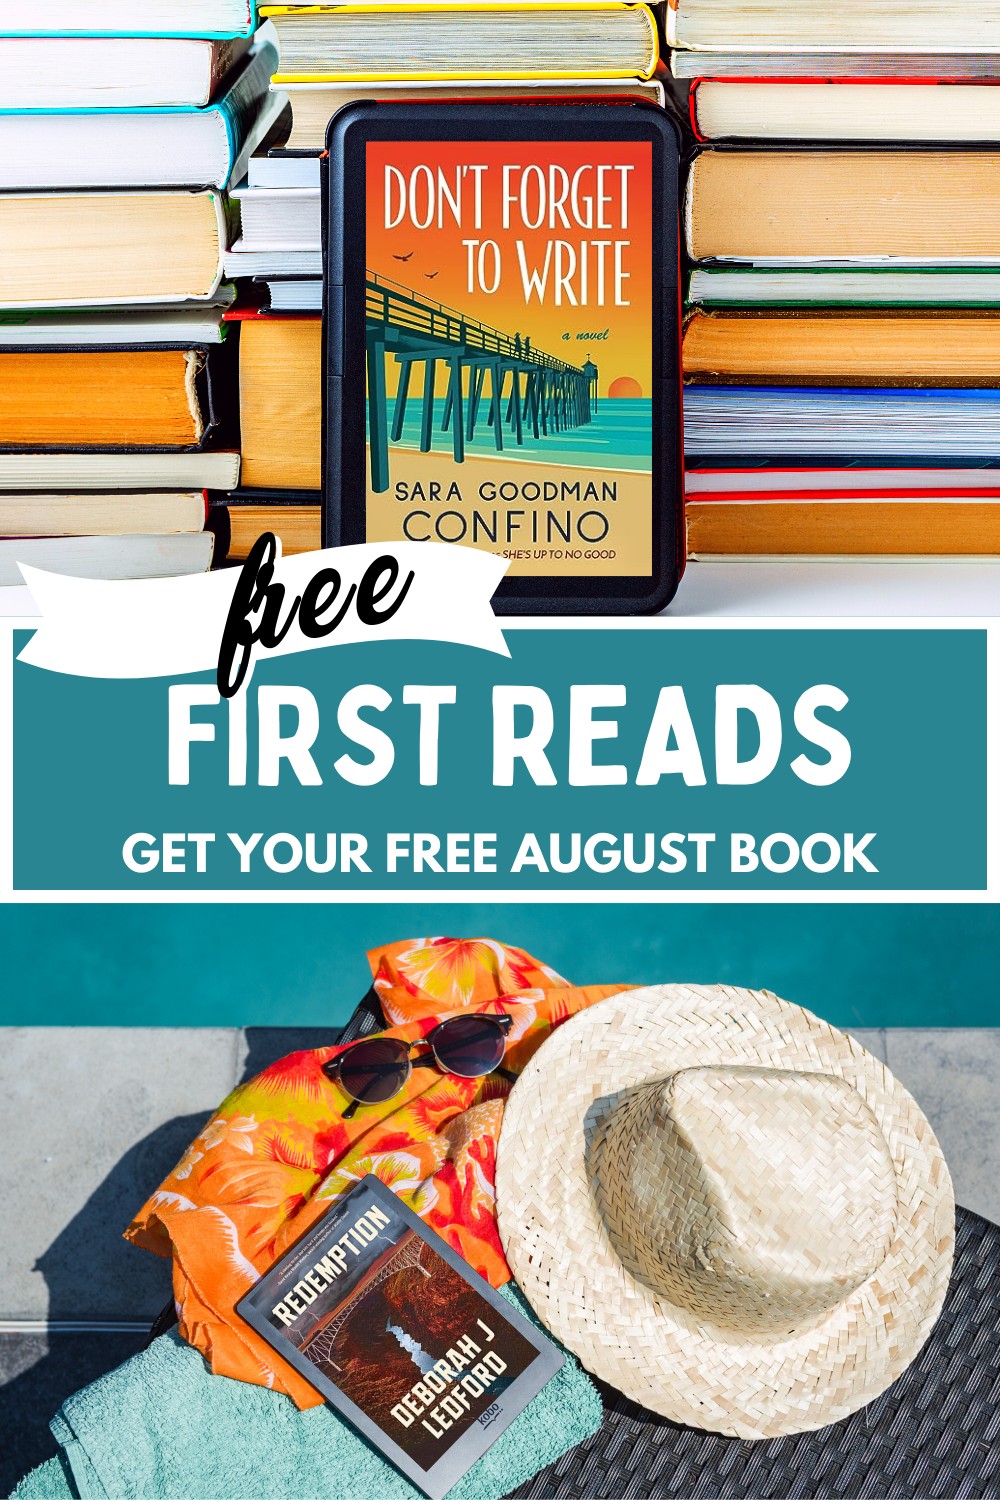 Amazon First Reads for August (Get Your FREE Book)